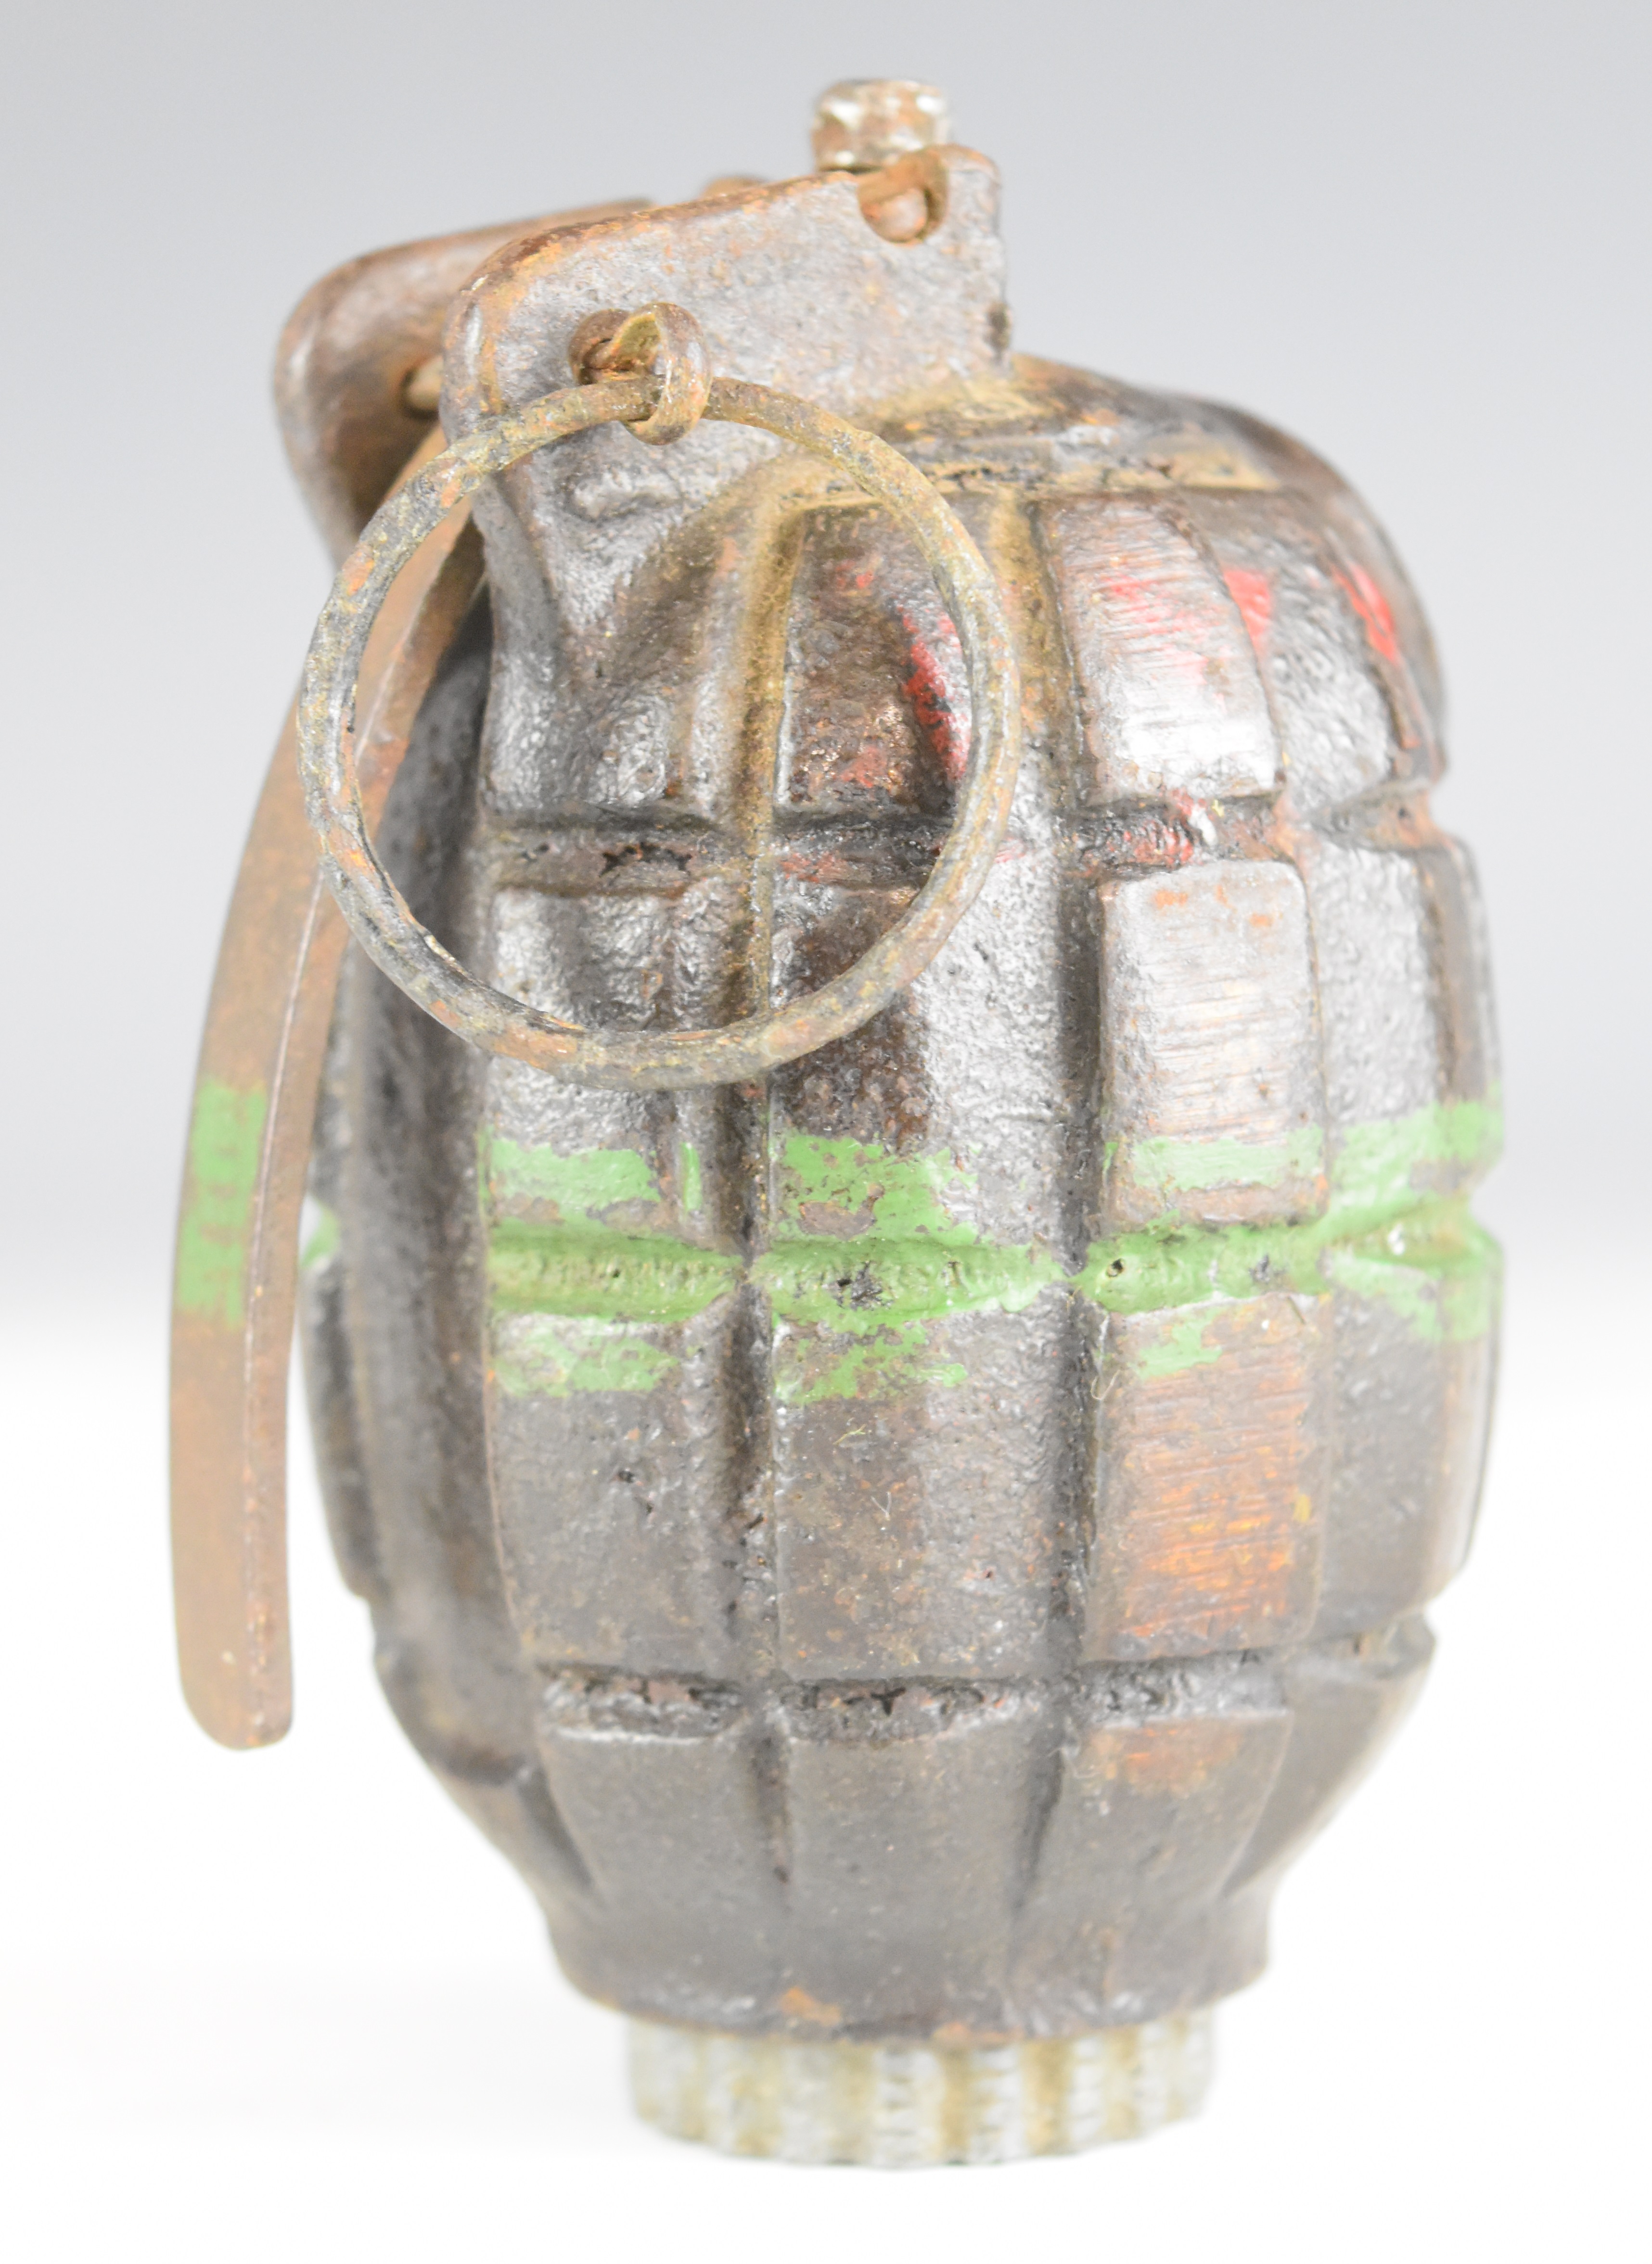 British WW2 inert Mills bomb / grenade stamped No 6 MZ MK I and SRD to alloy screw in base - Image 6 of 10